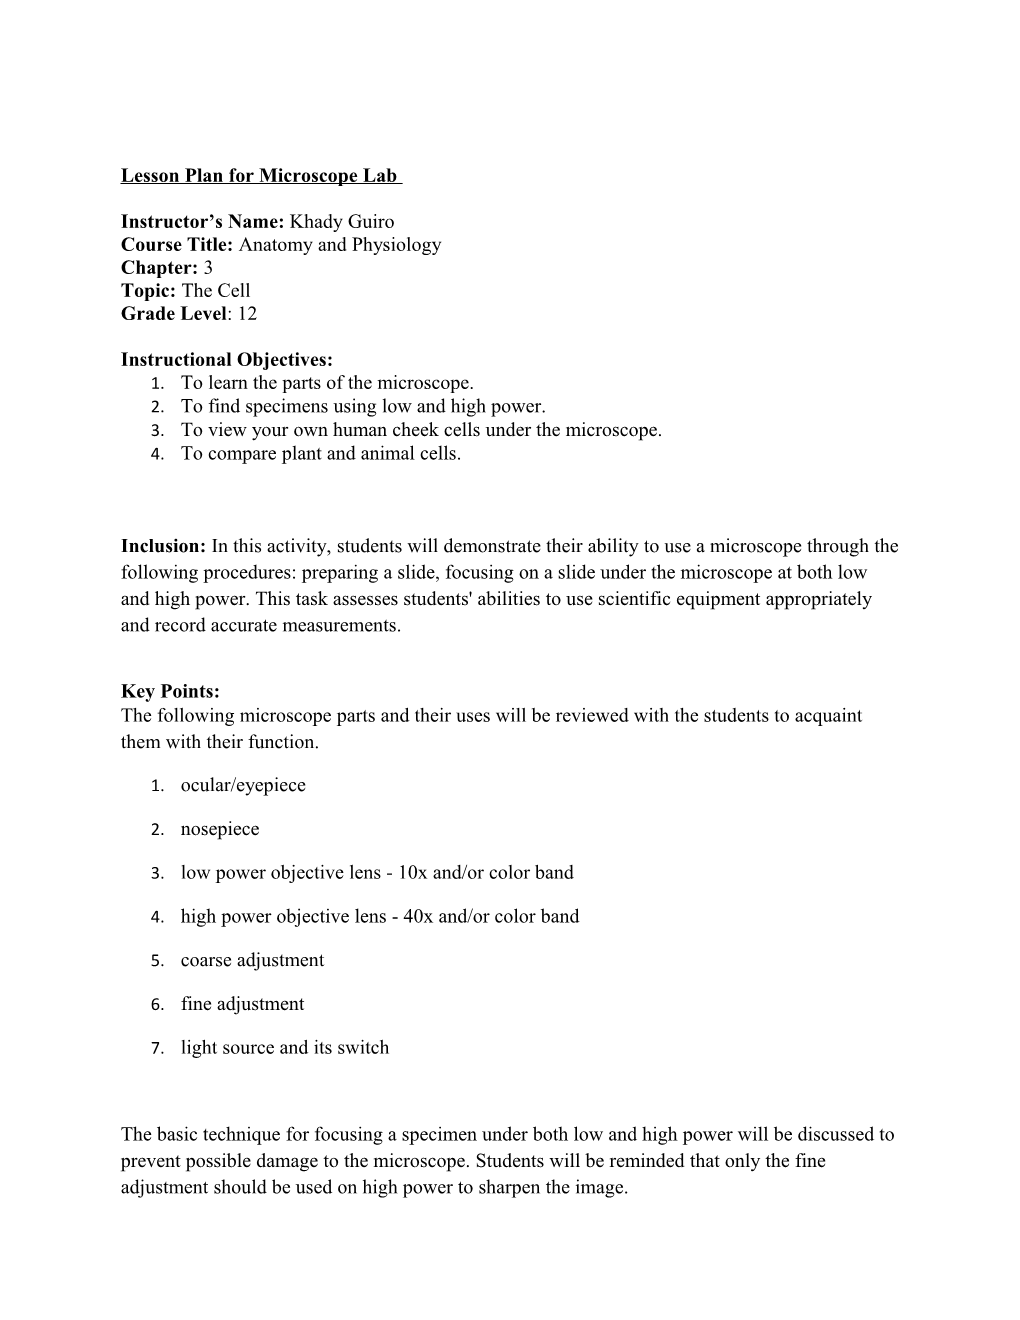 Lesson Plan for Microscope Lab